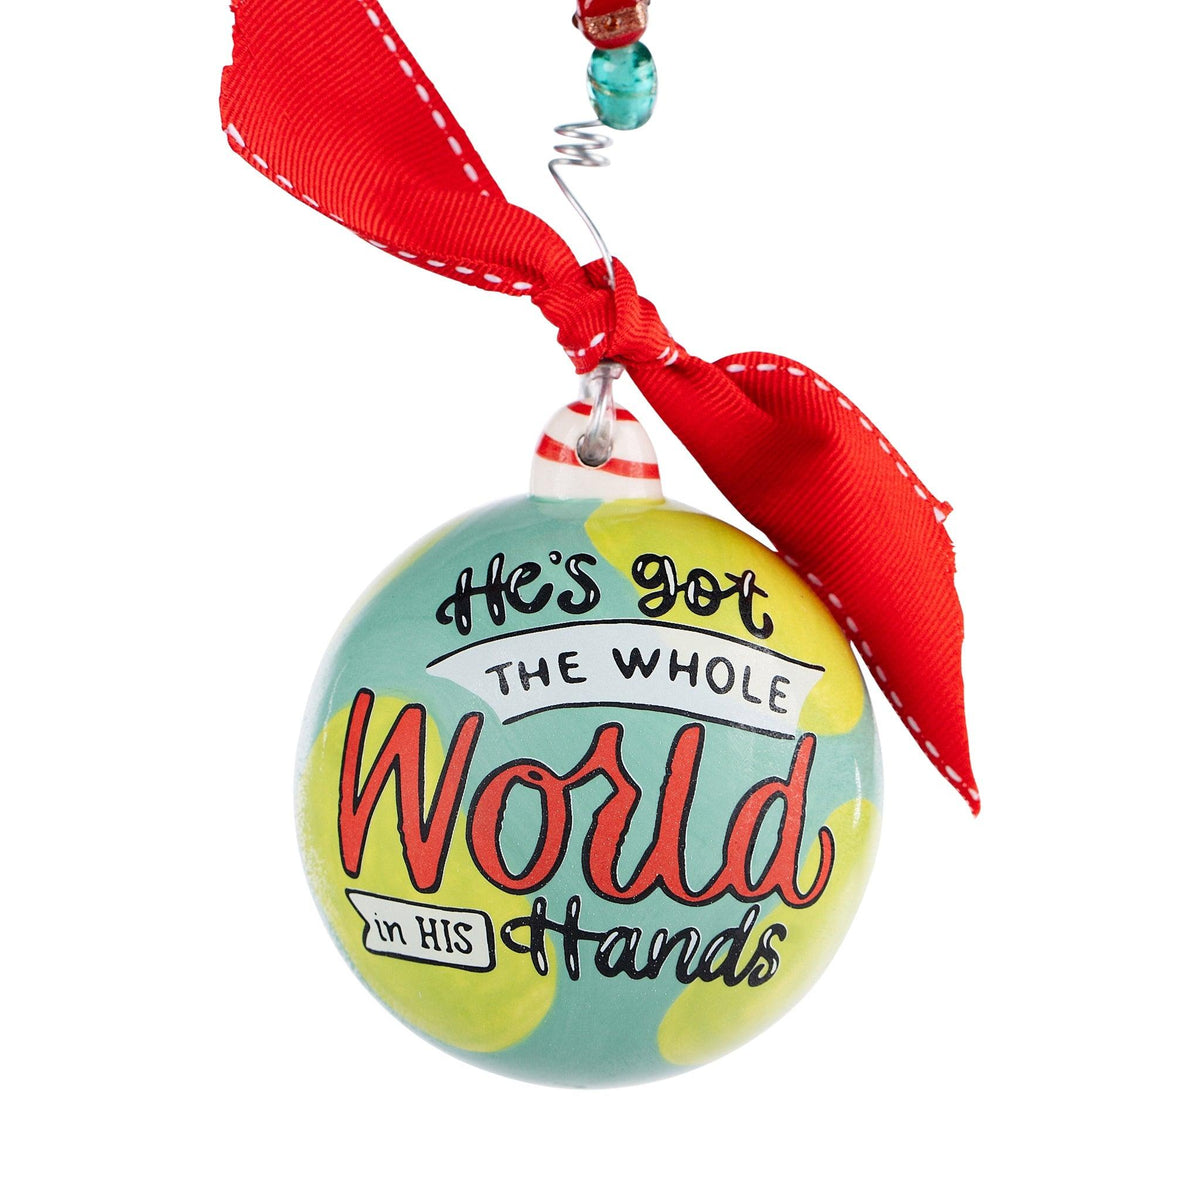 The Whole World In His Hands Ornament - GLORY HAUS 